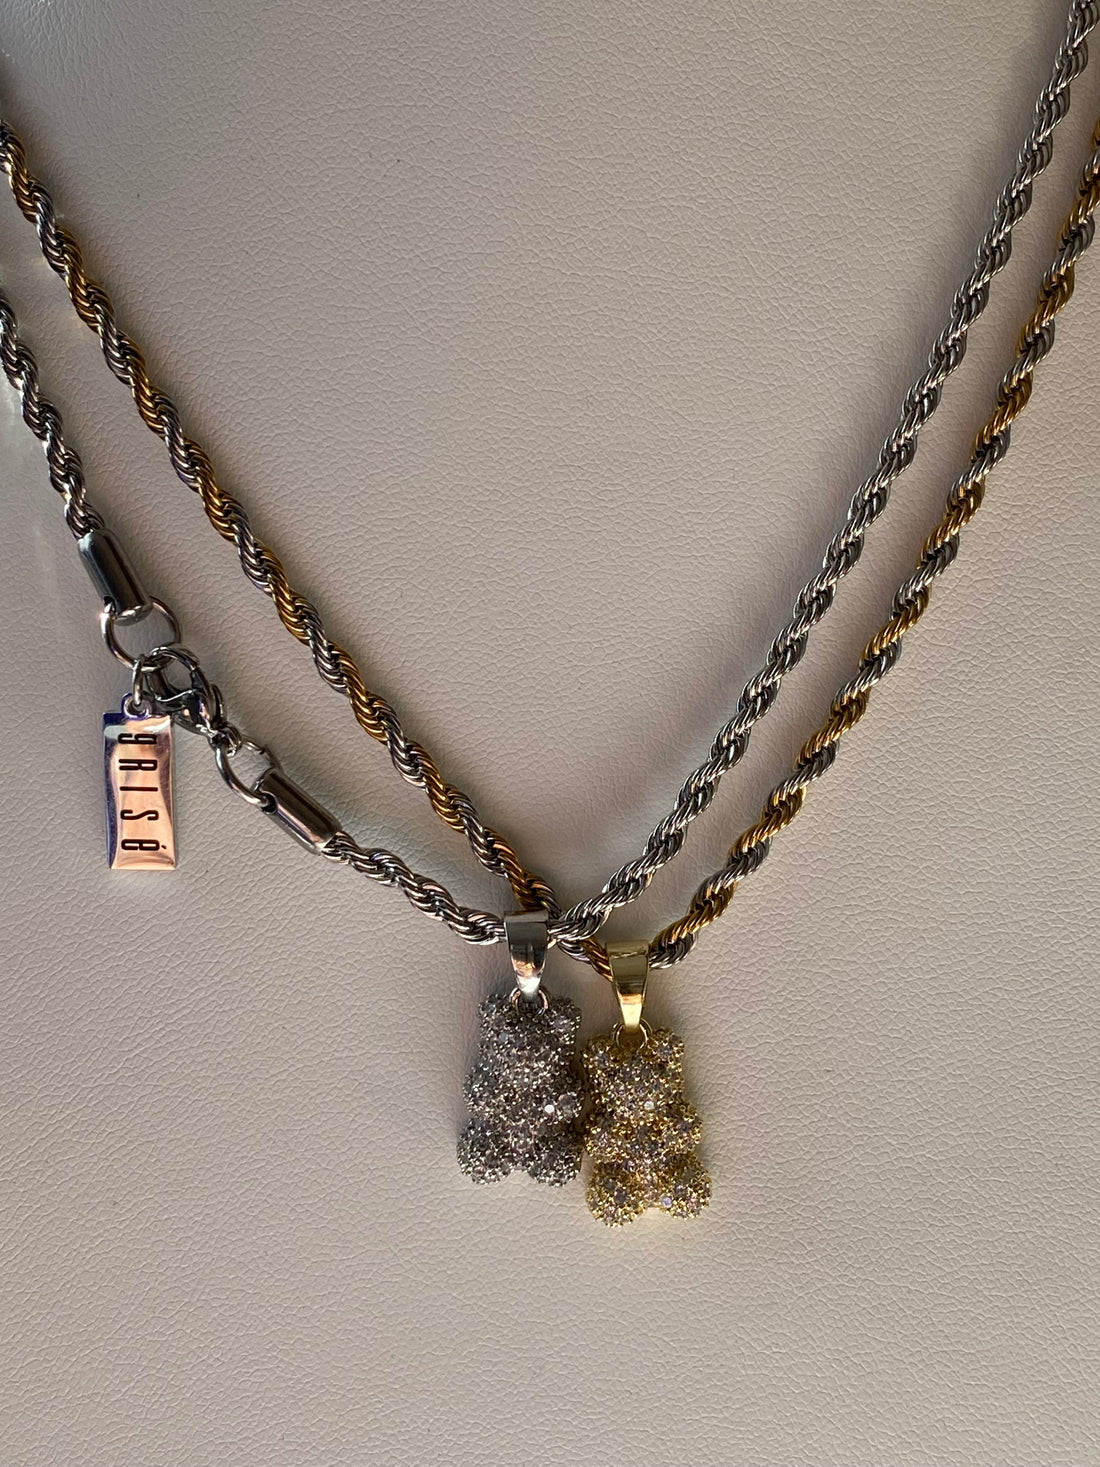 Two-Tone Iced Out Teddy Bear Necklace